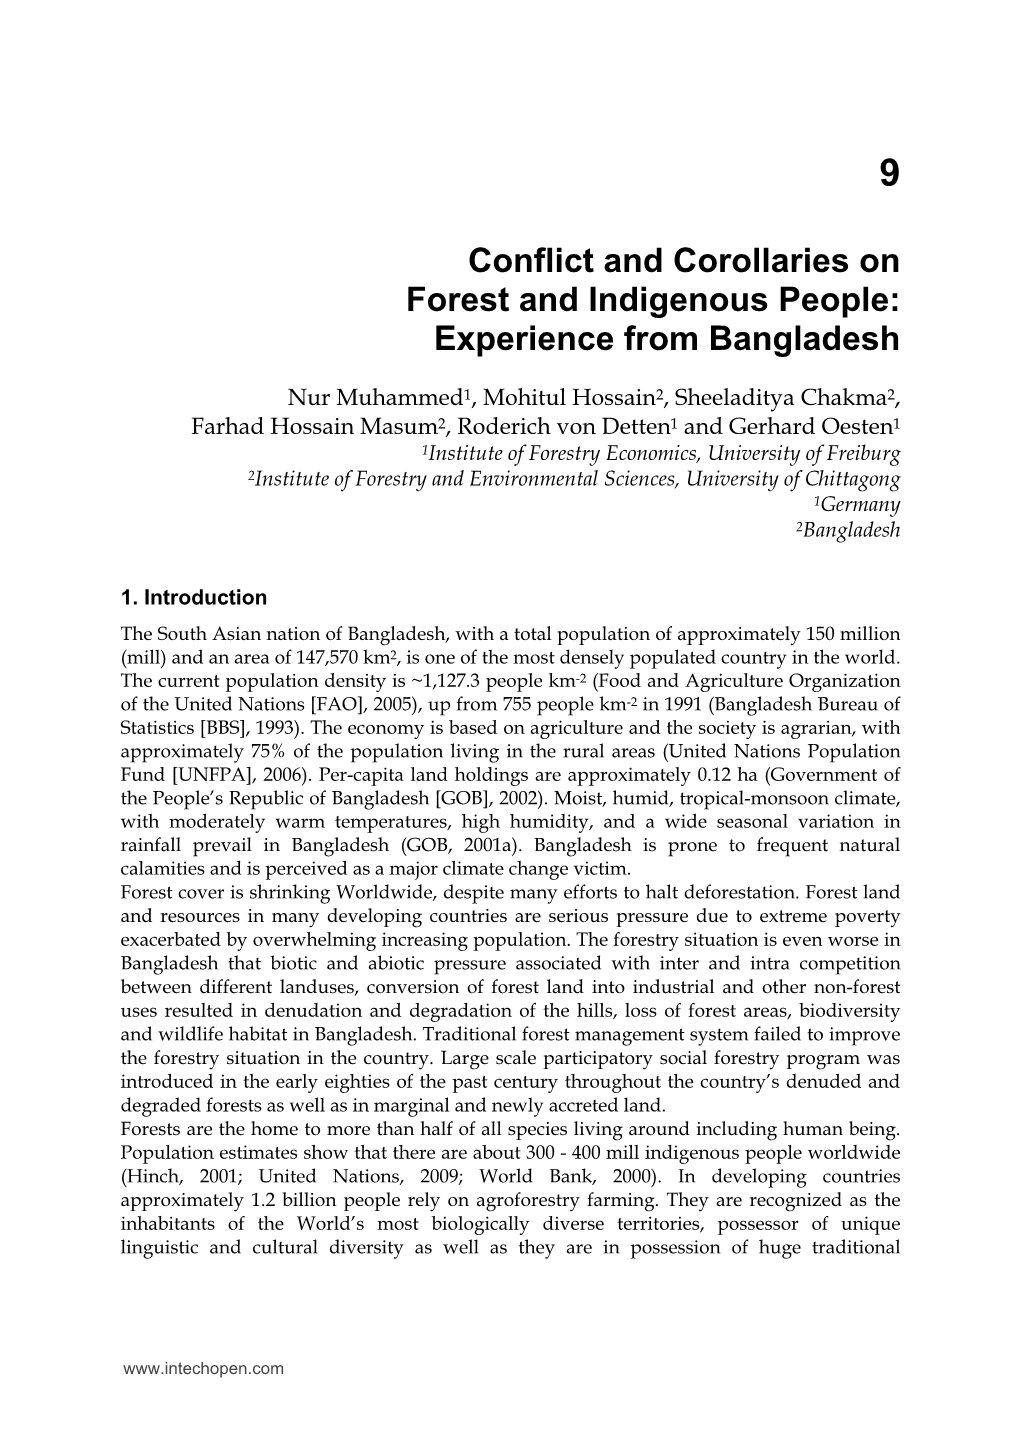 Conflict and Corollaries on Forest and Indigenous People: Experience from Bangladesh